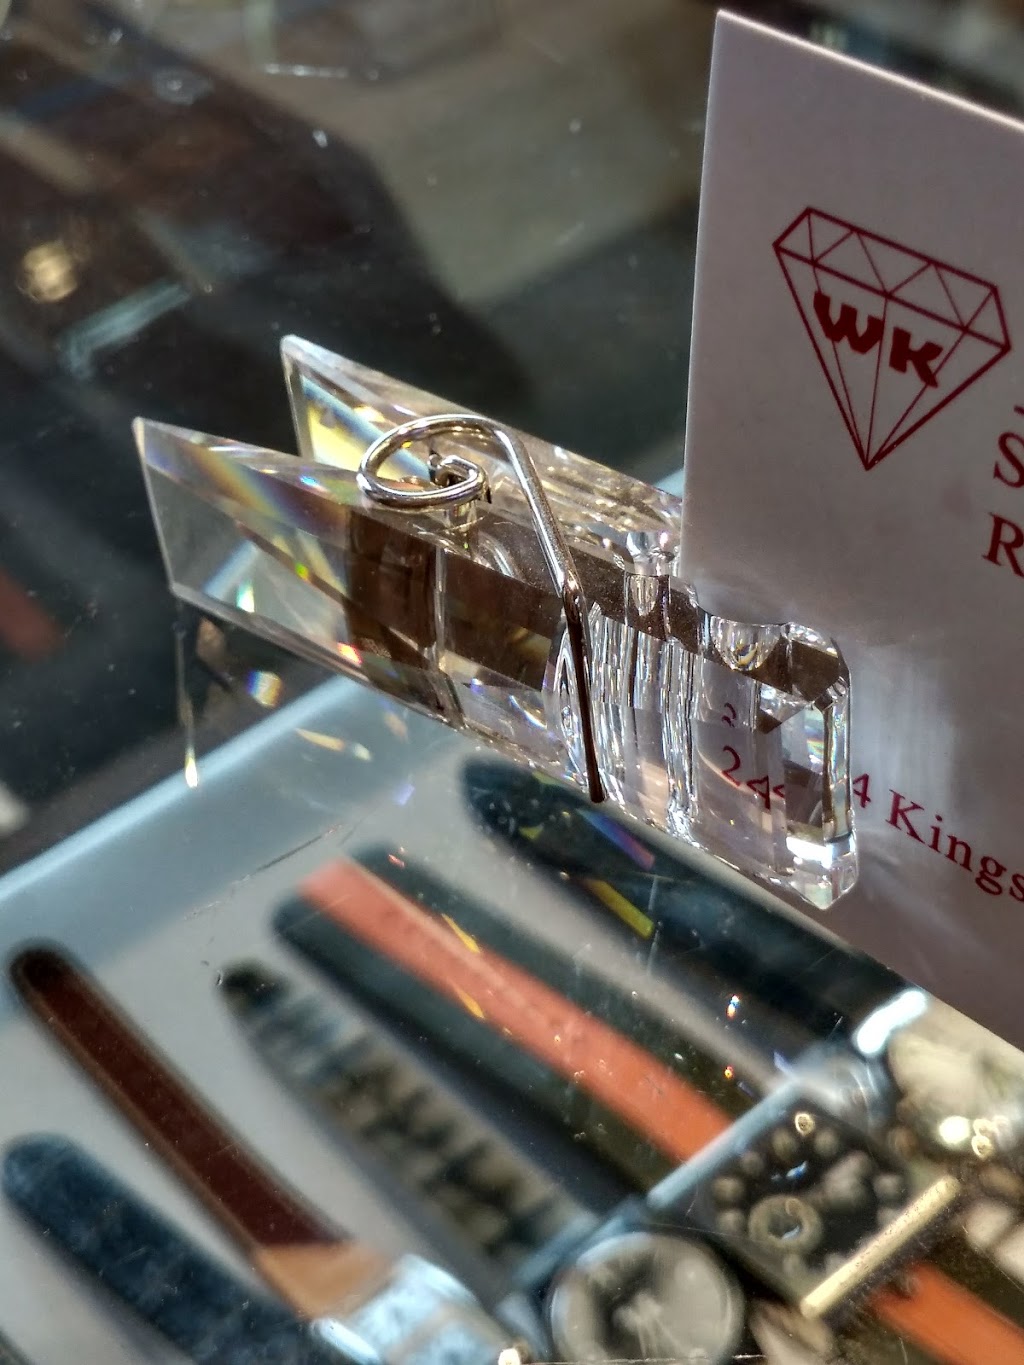 W K Watch & Jewellers - Watch Repair and Jewellery Services | jewelry store | 2424 Kingston Rd, Scarborough, ON M1N 1V3, Canada | 4169183338 OR +1 416-918-3338